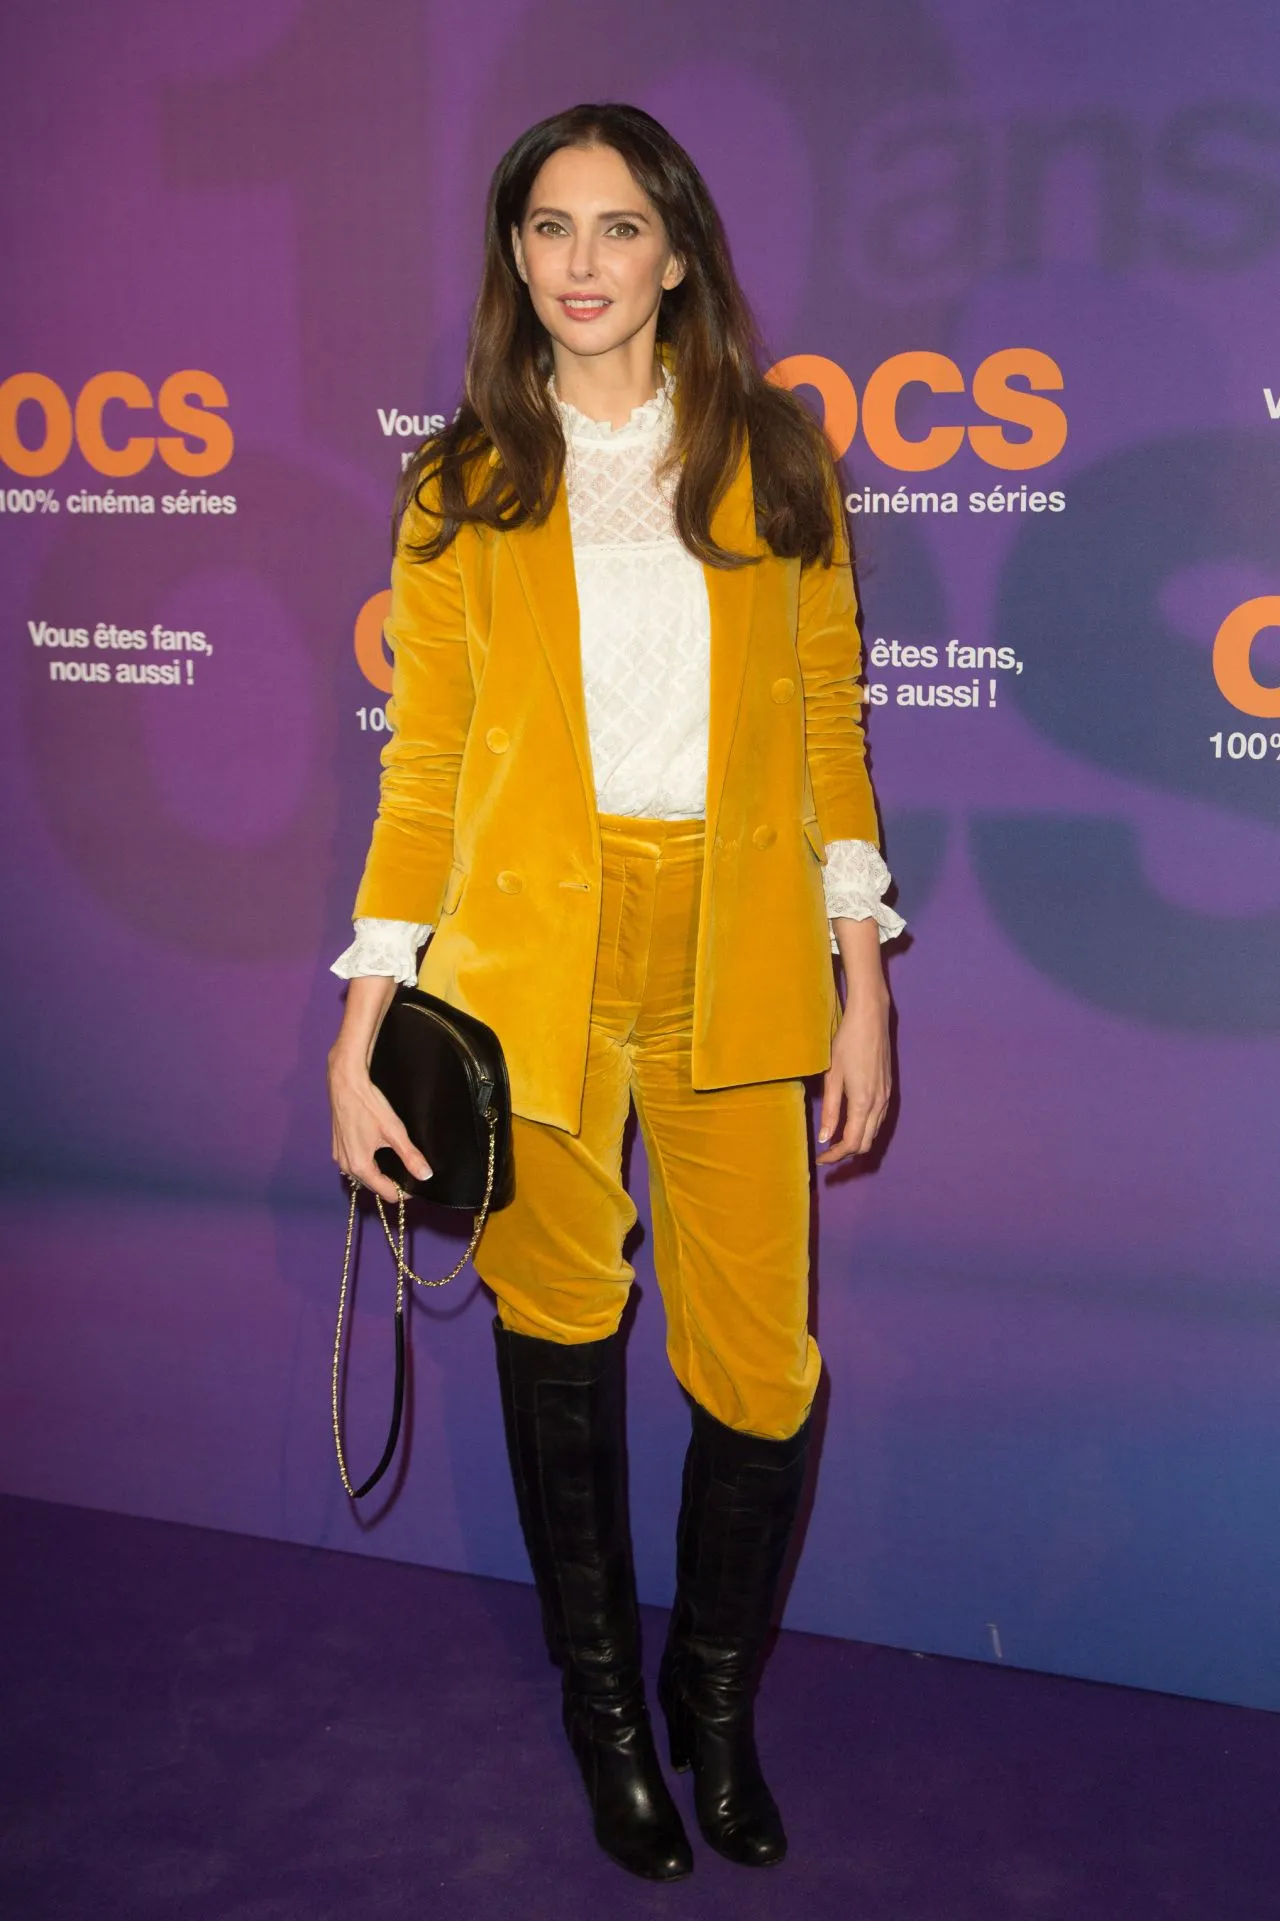 FREDERIQUE BEL AT OCS 10TH ANNIVERSARY PARTY AT PAVILLON IN PARIS